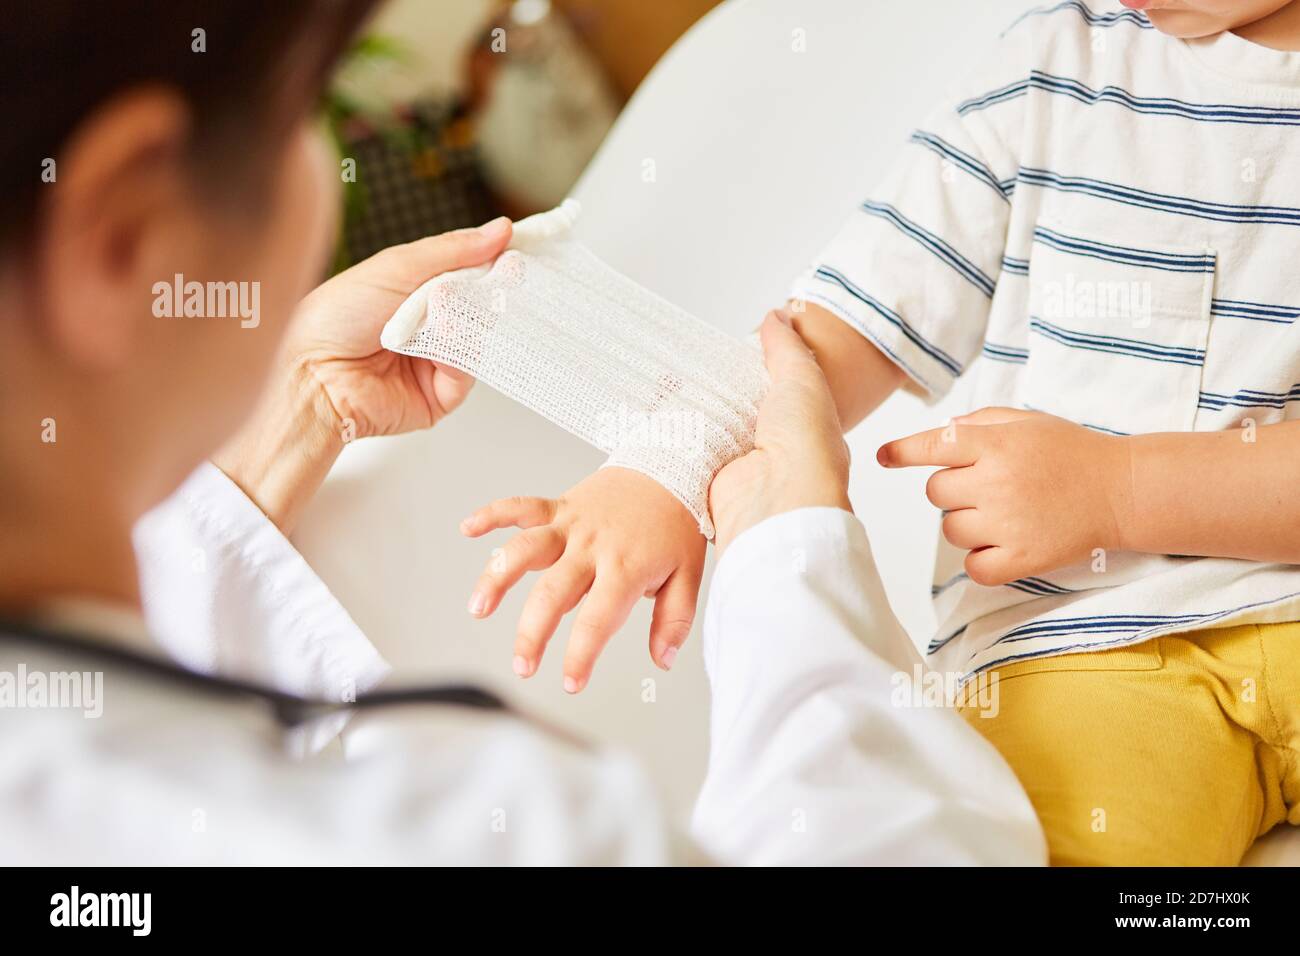 Pediatrician wraps bandage around child's wrist in the event of a sprain or accident Stock Photo